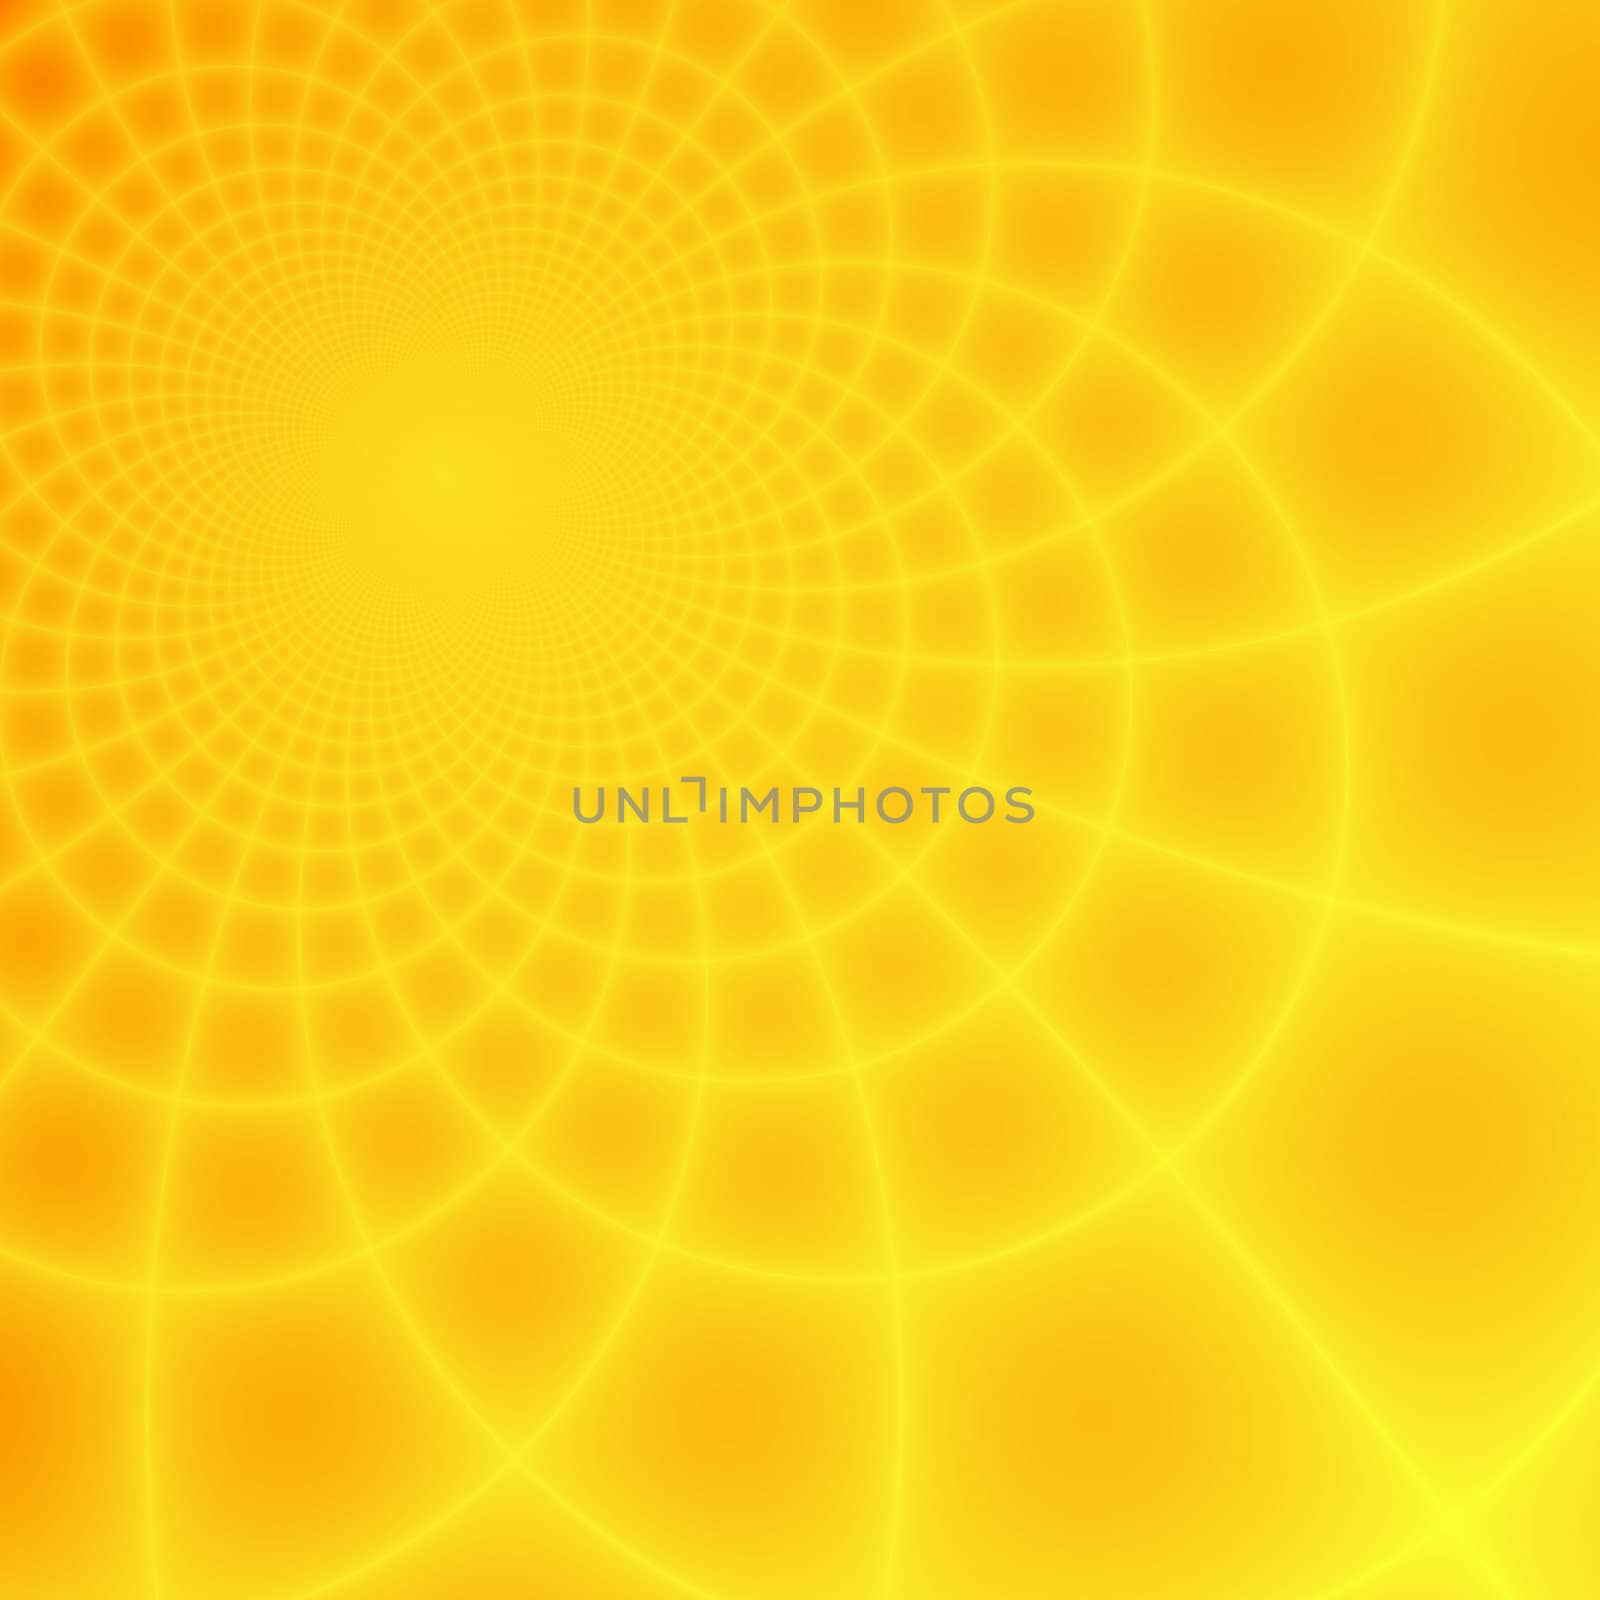 Abstract yellow and orange rendered fractal background